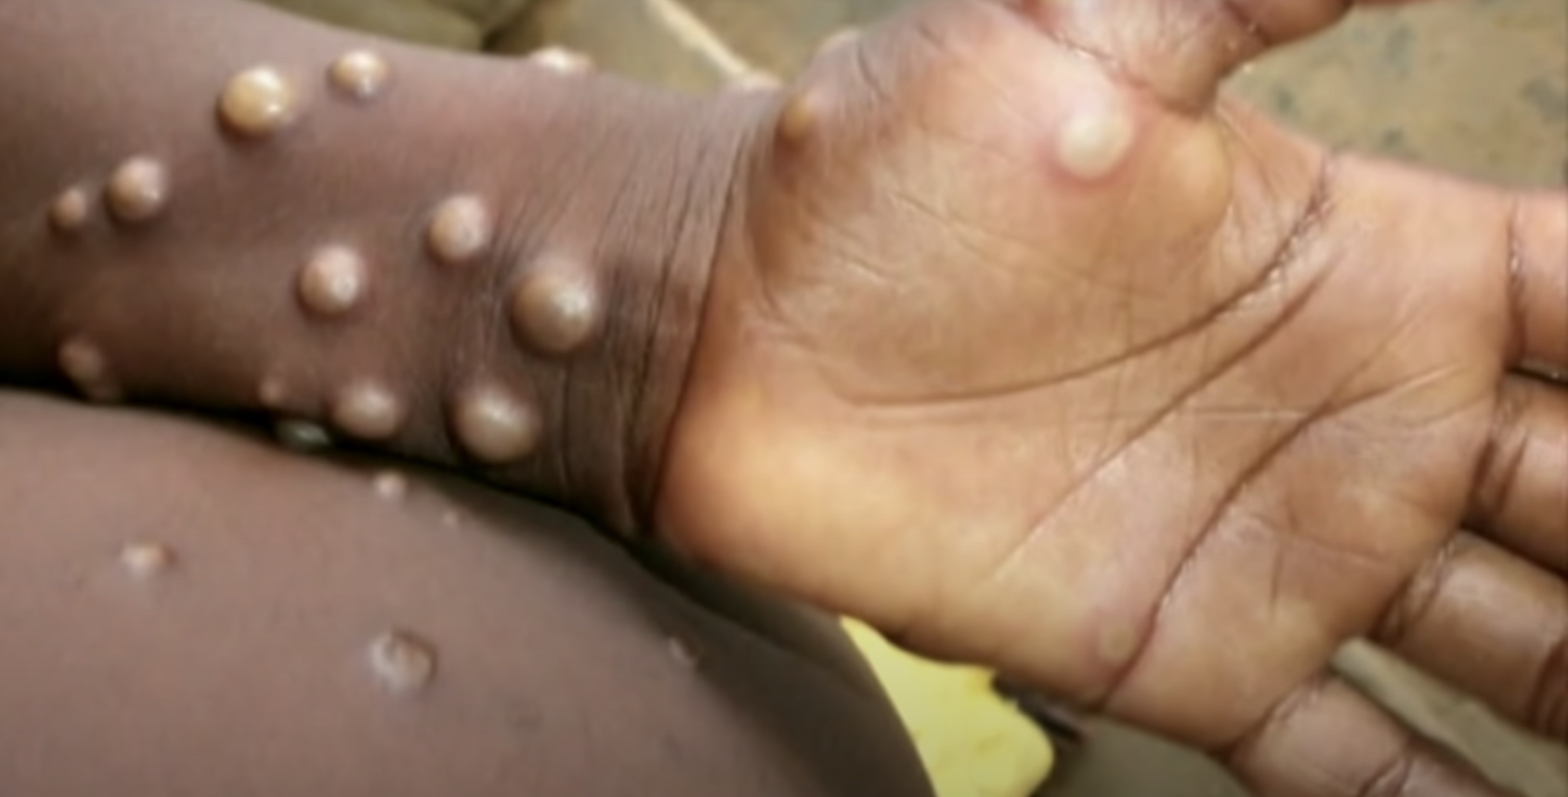 WHO to Decide if Monkeypox Constitutes Public Health Emergency 